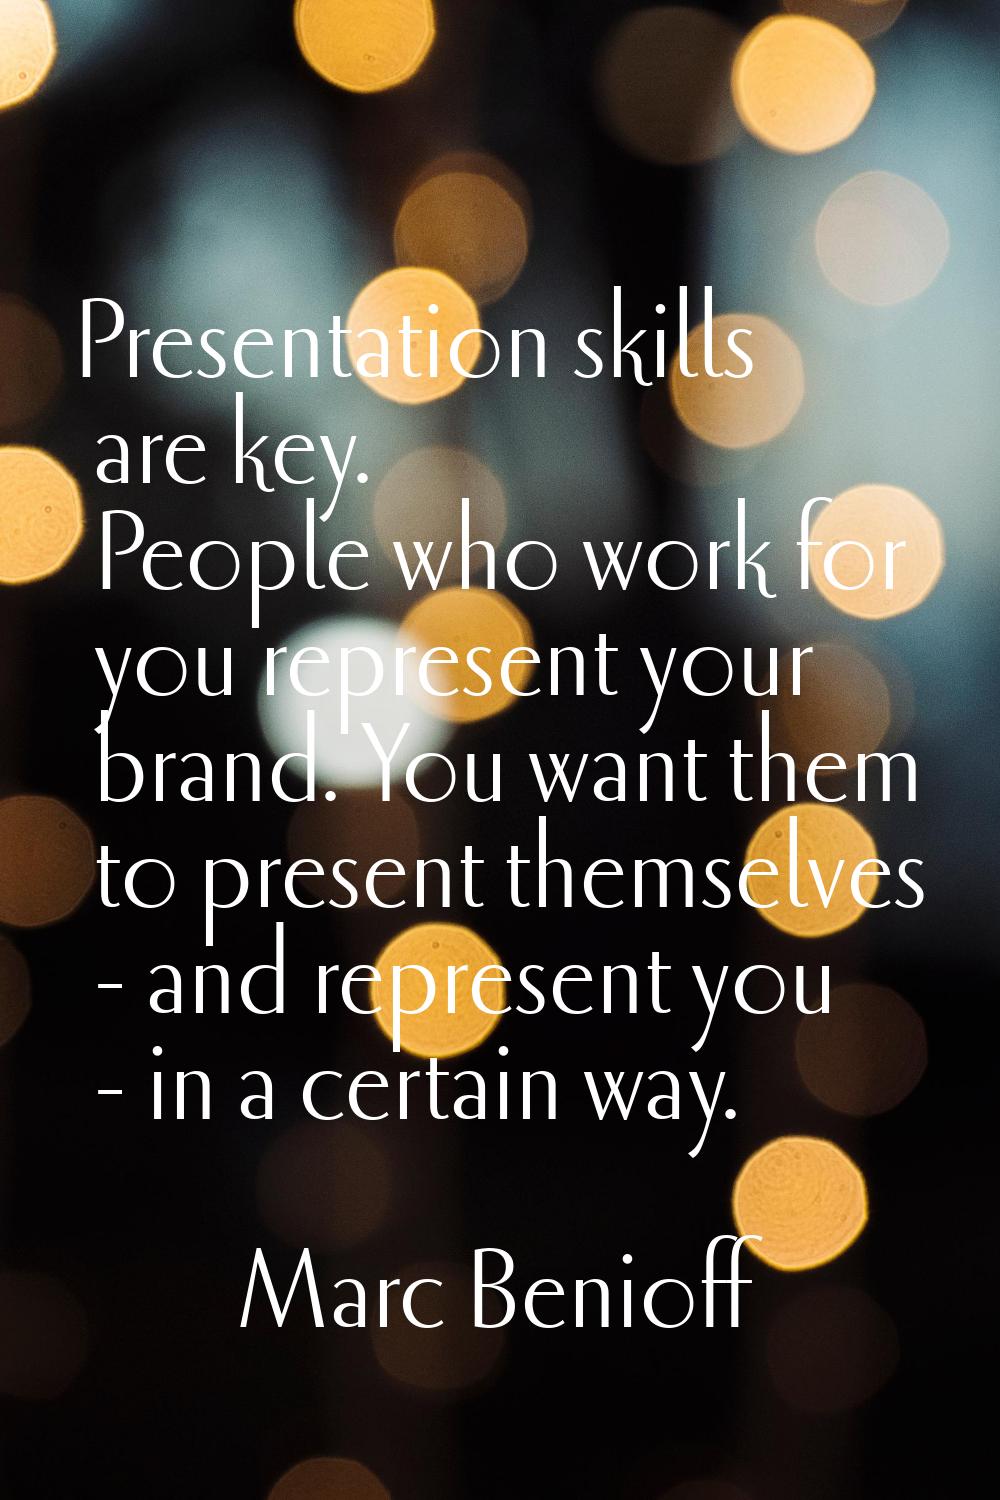 Presentation skills are key. People who work for you represent your brand. You want them to present